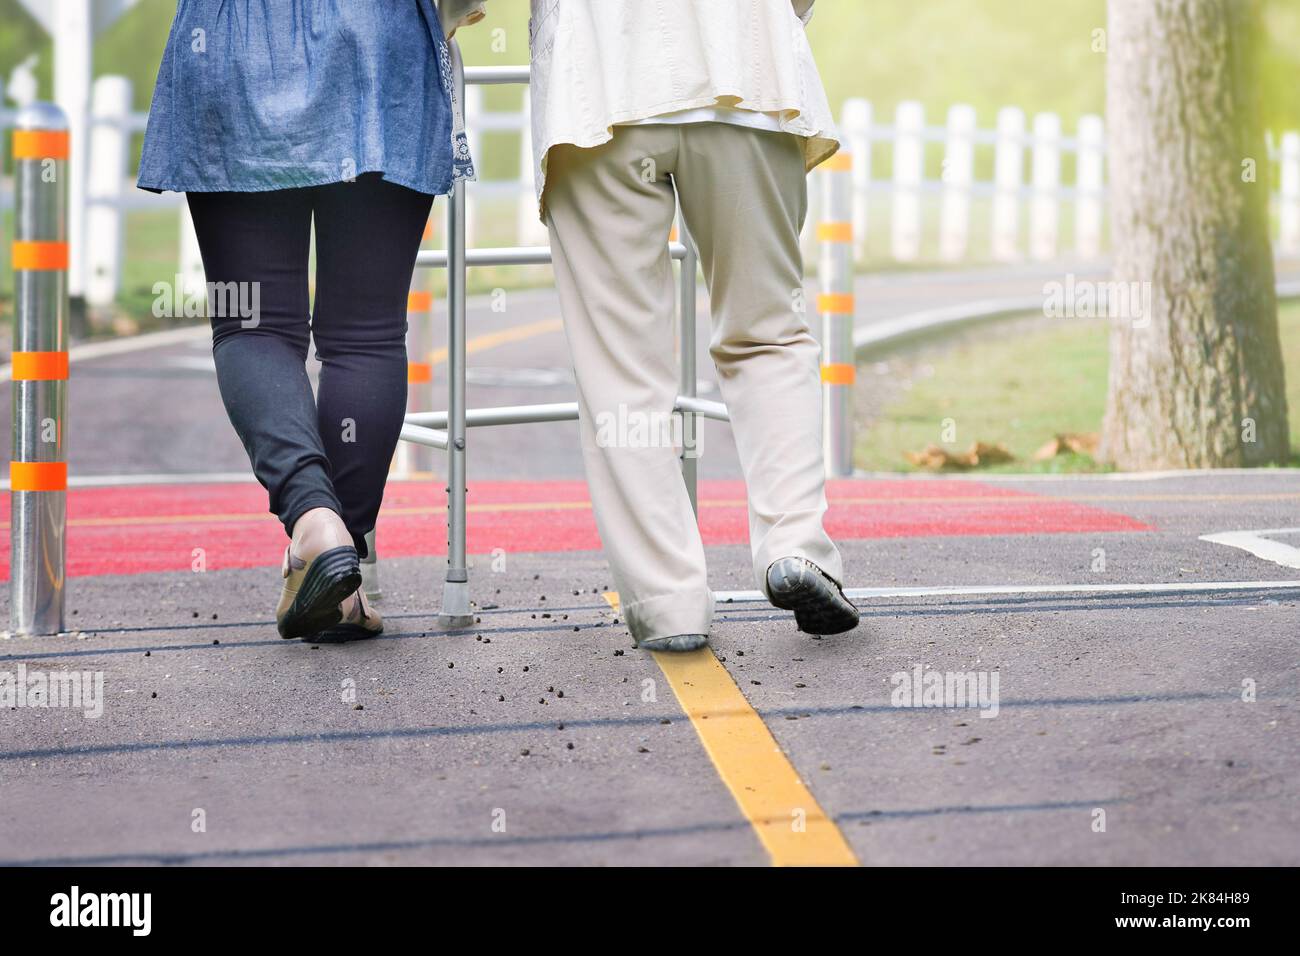 Elderly woman exercise walking in road with daughter with daughter Stock Photo